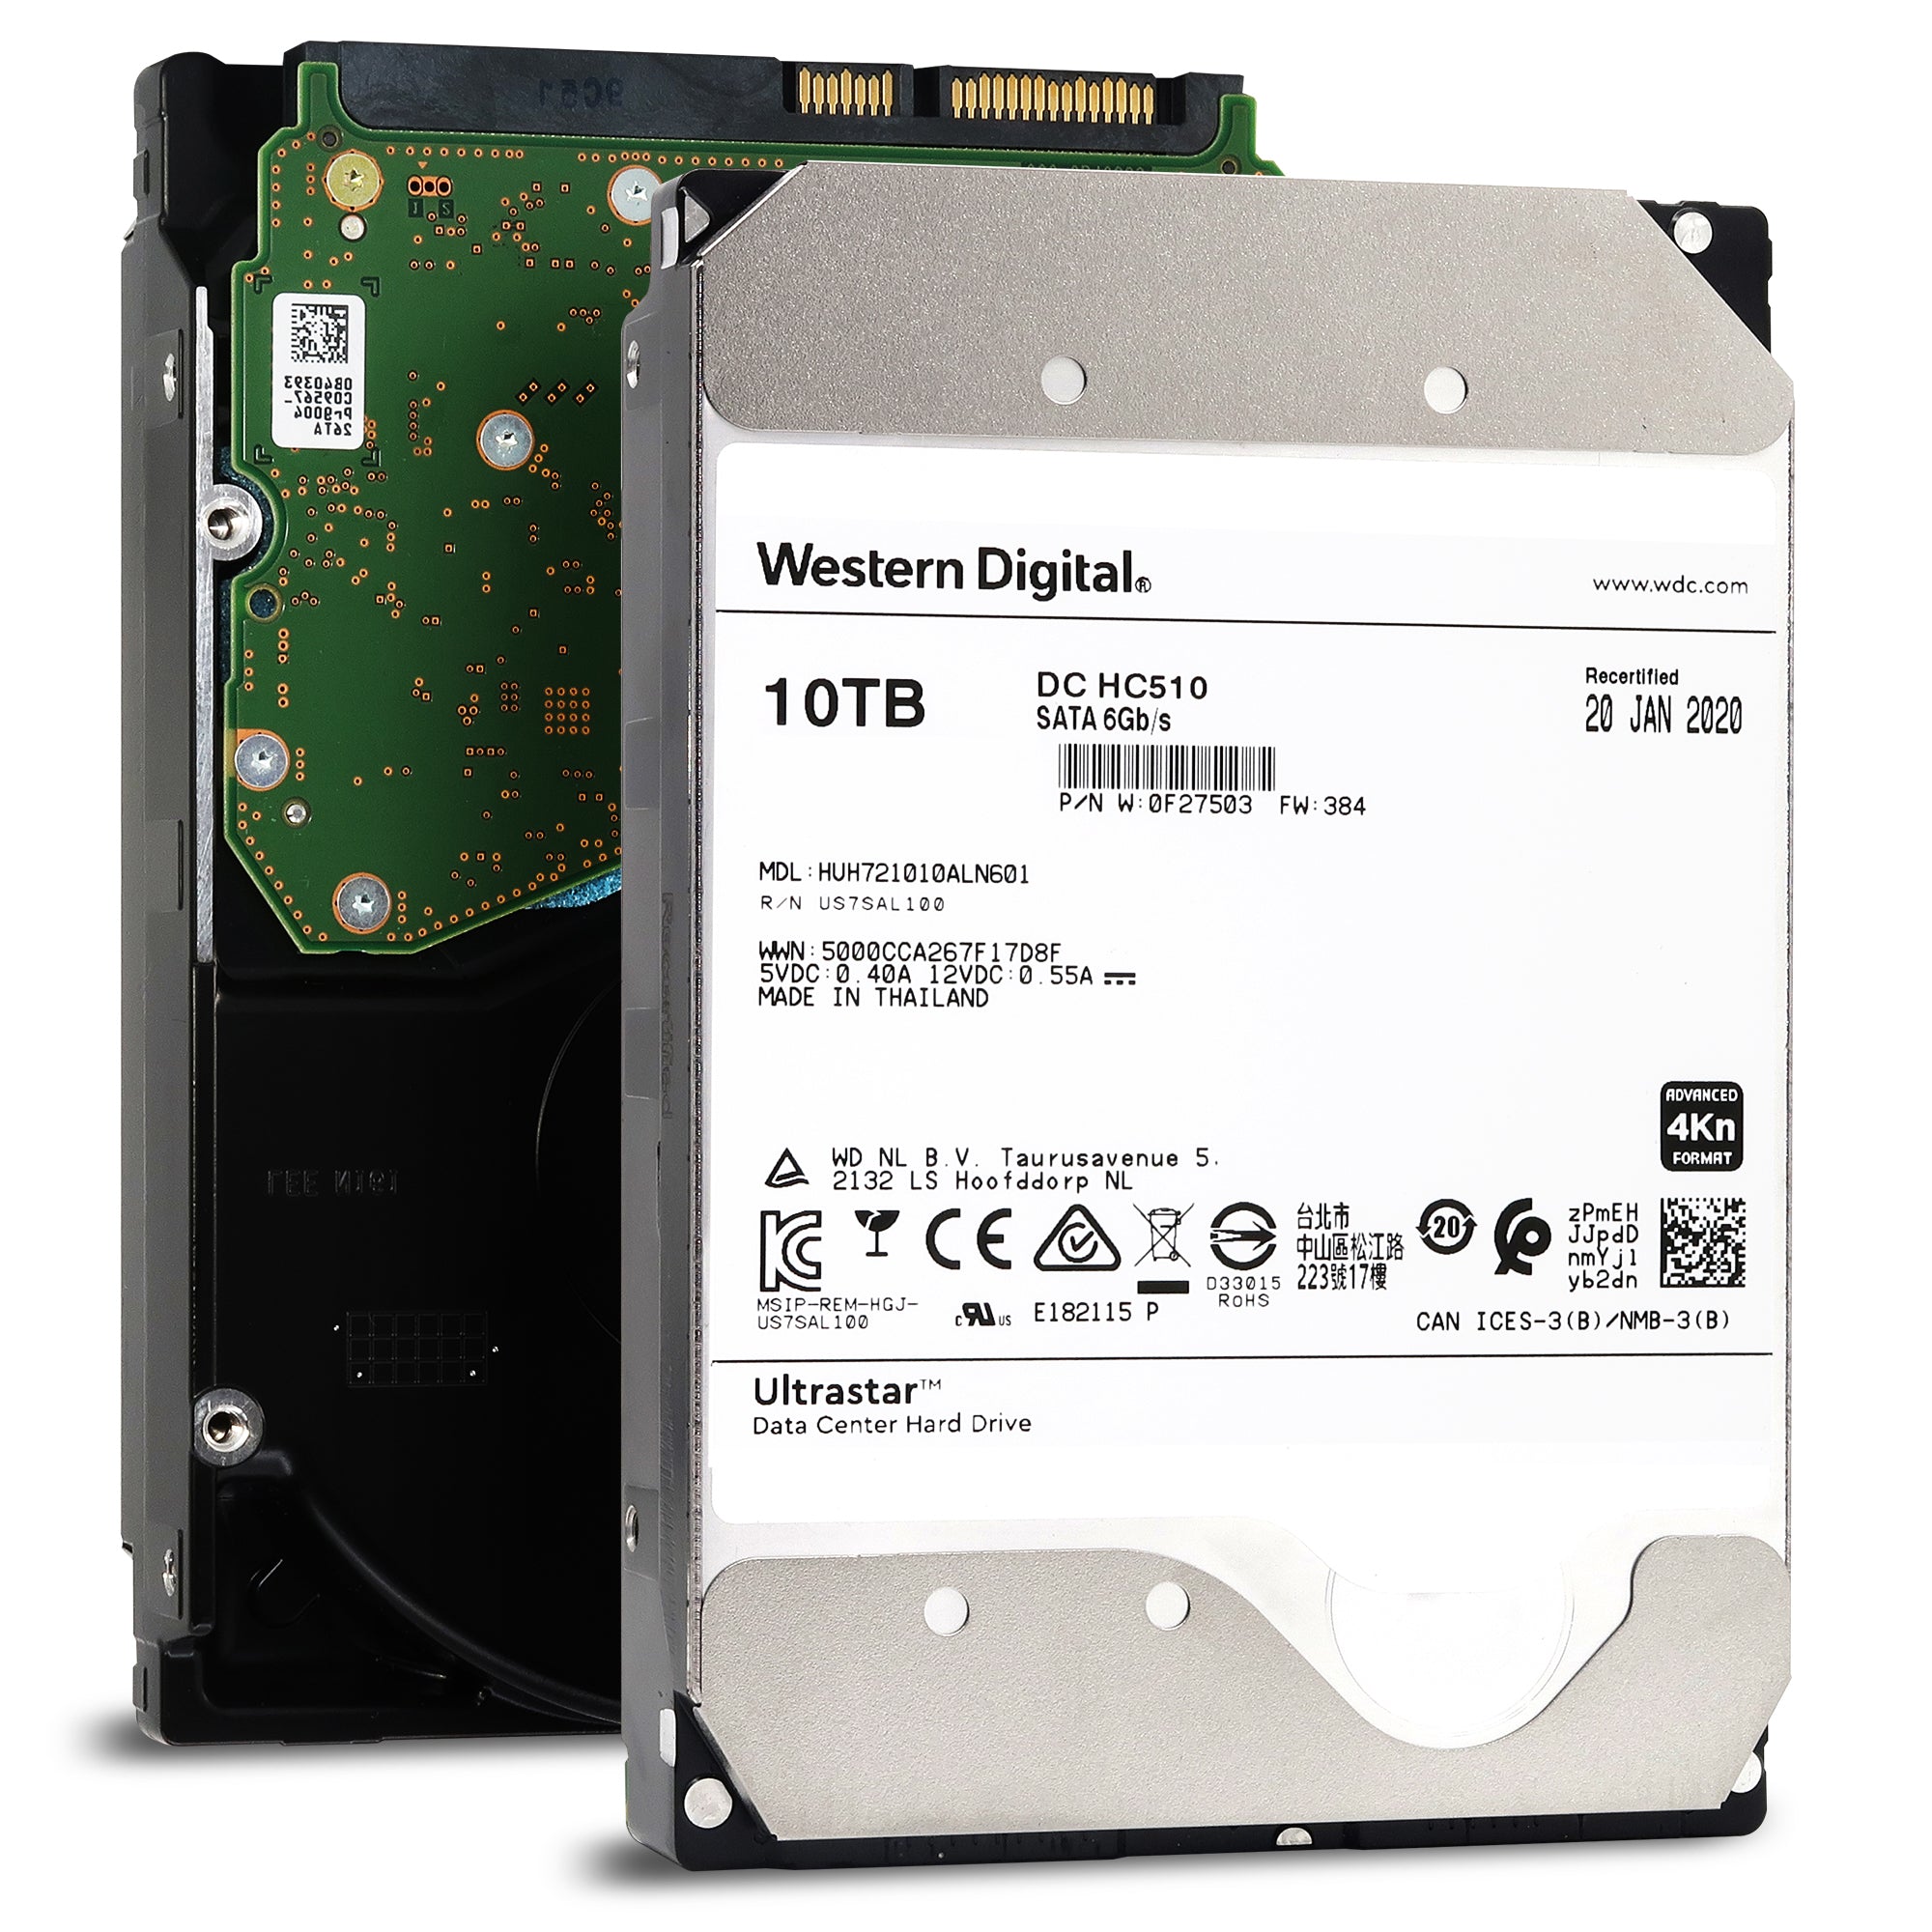 WD / HGST Ultrastar He10 / HC510 HUH721010ALN601 0F27503 10TB 7.2K RPM SATA 6Gb/s 4Kn 256MB 3.5" SED Power Disable Pin Manufacturer Recertified HDD